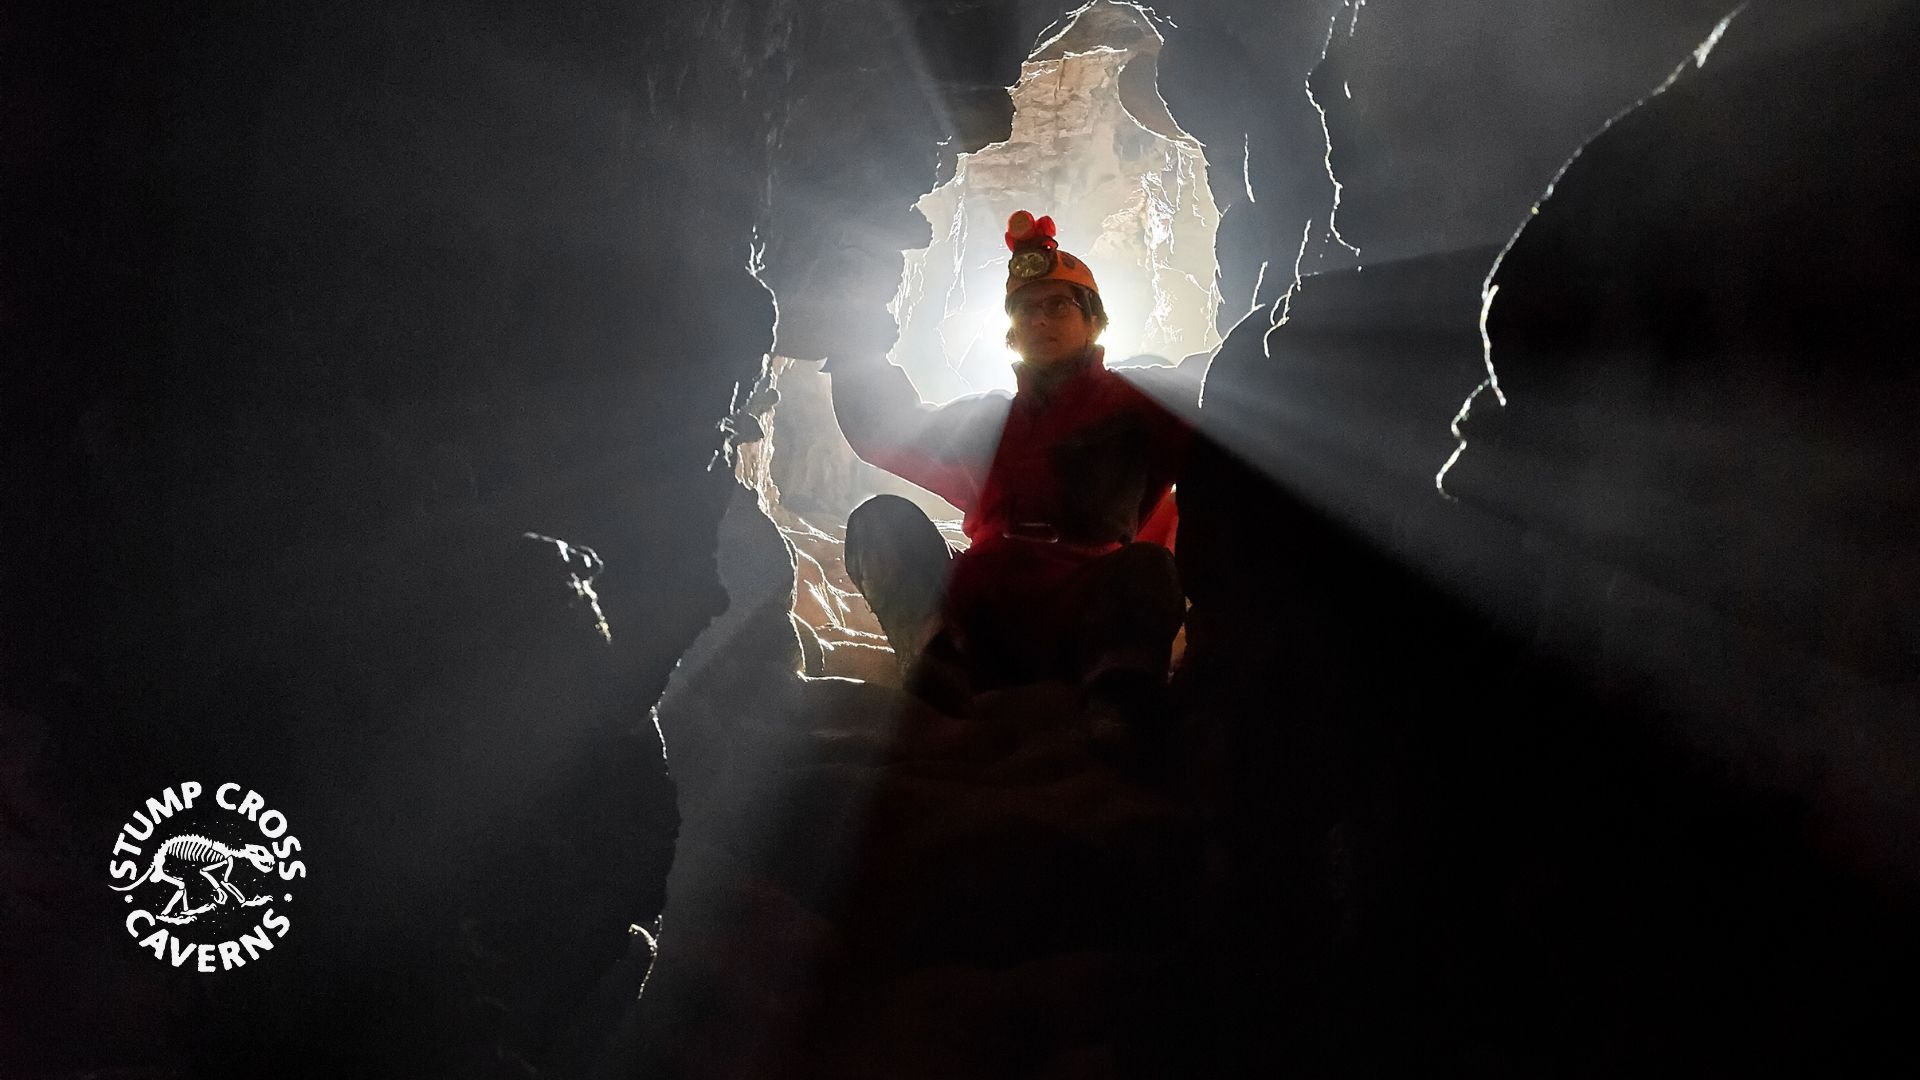 Learn about the secrets of Heaven and Hell, 2 areas found in the extensive Stump Cross cave system.
